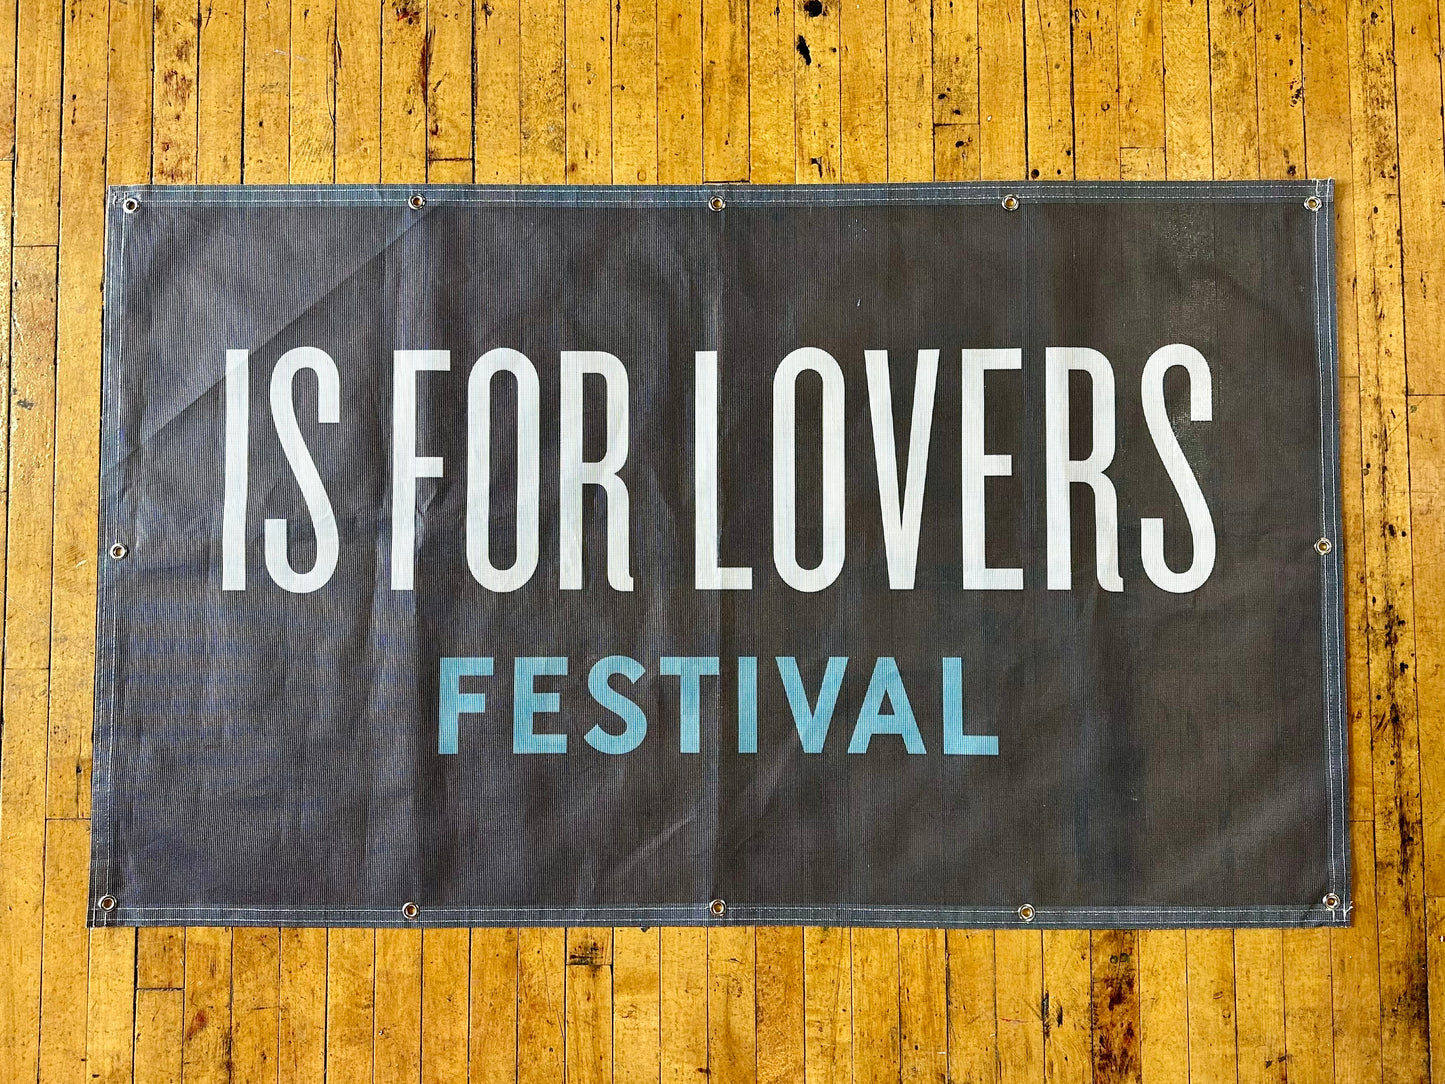 IS FOR LOVERS Festival Banners